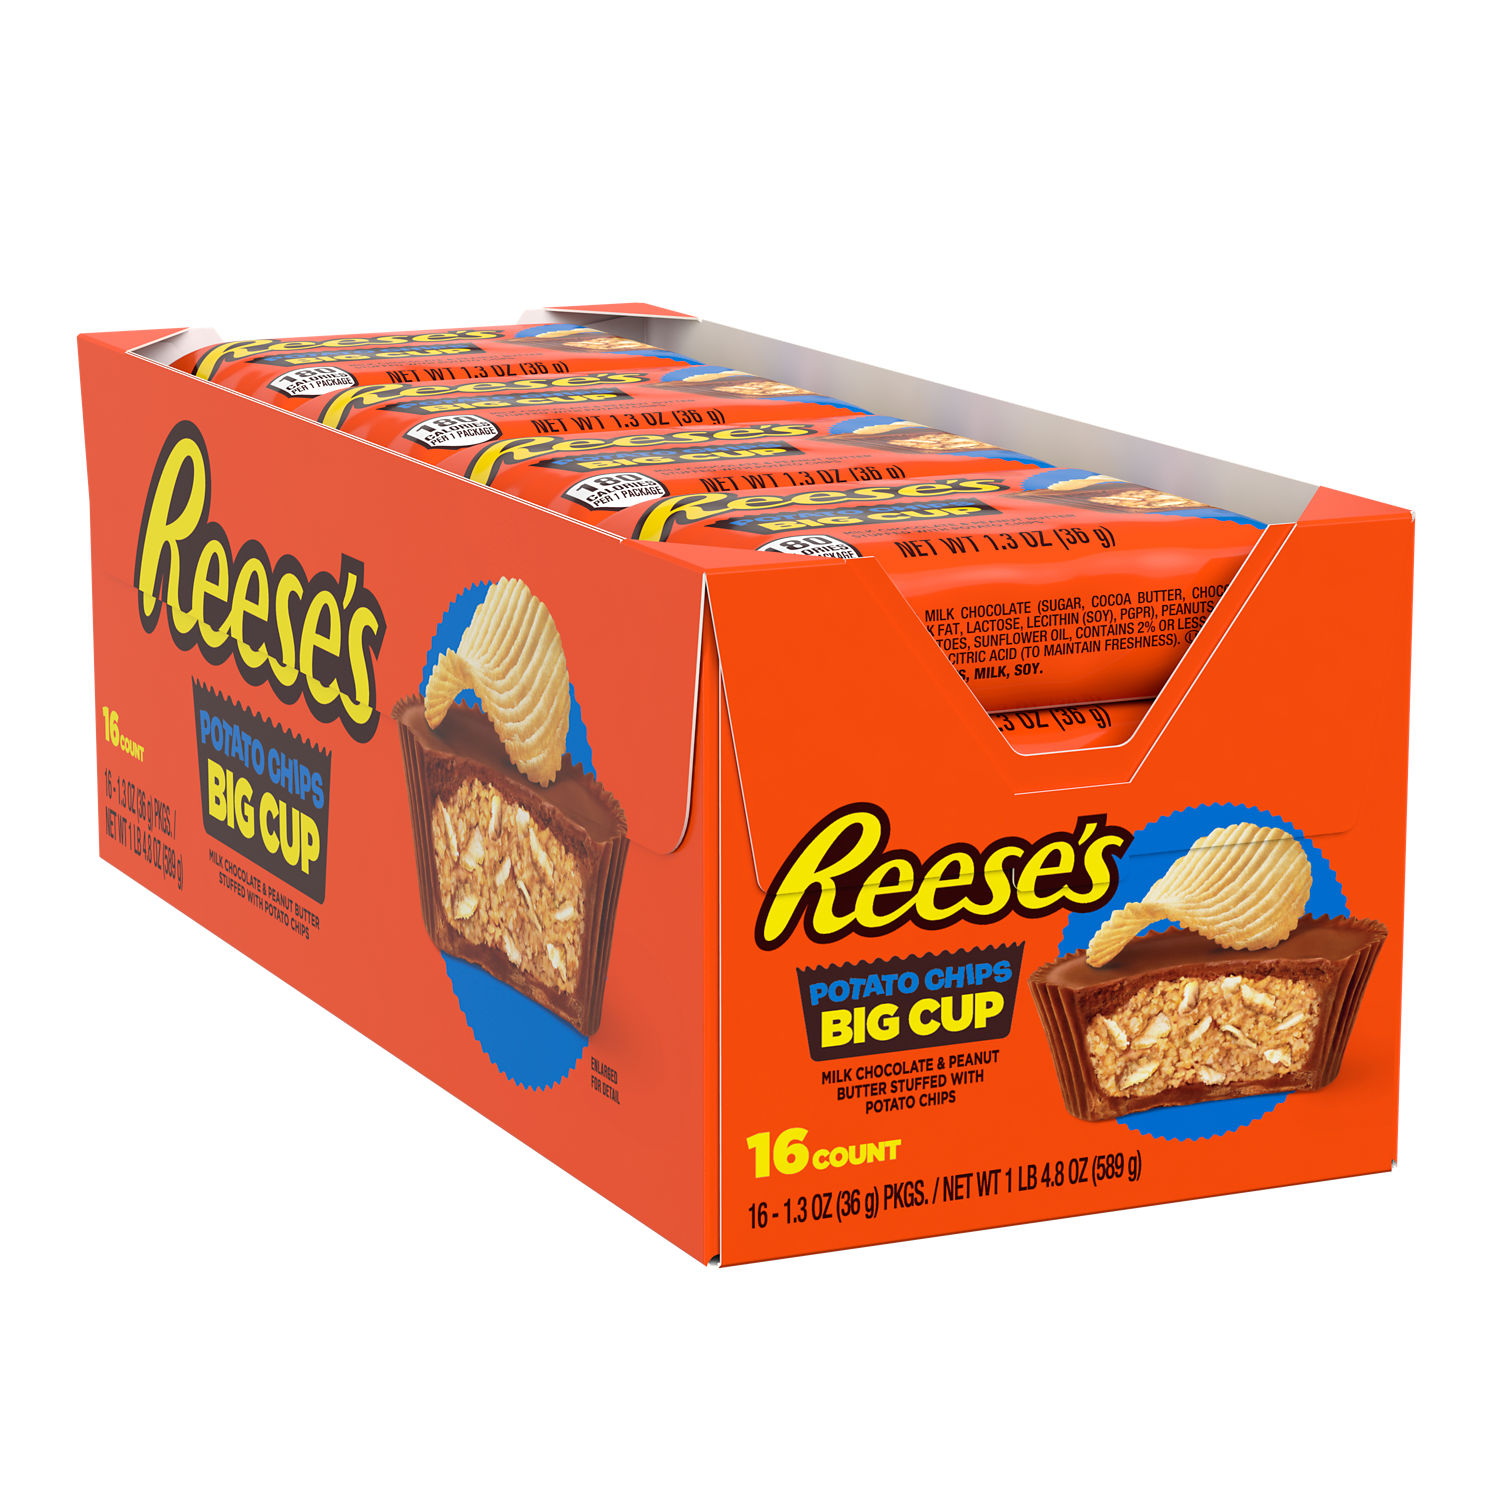 Reeses Big Cup Milk Chocolate Peanut Butter Cups With Potato Chips Standard Size 13oz Candy Bar 